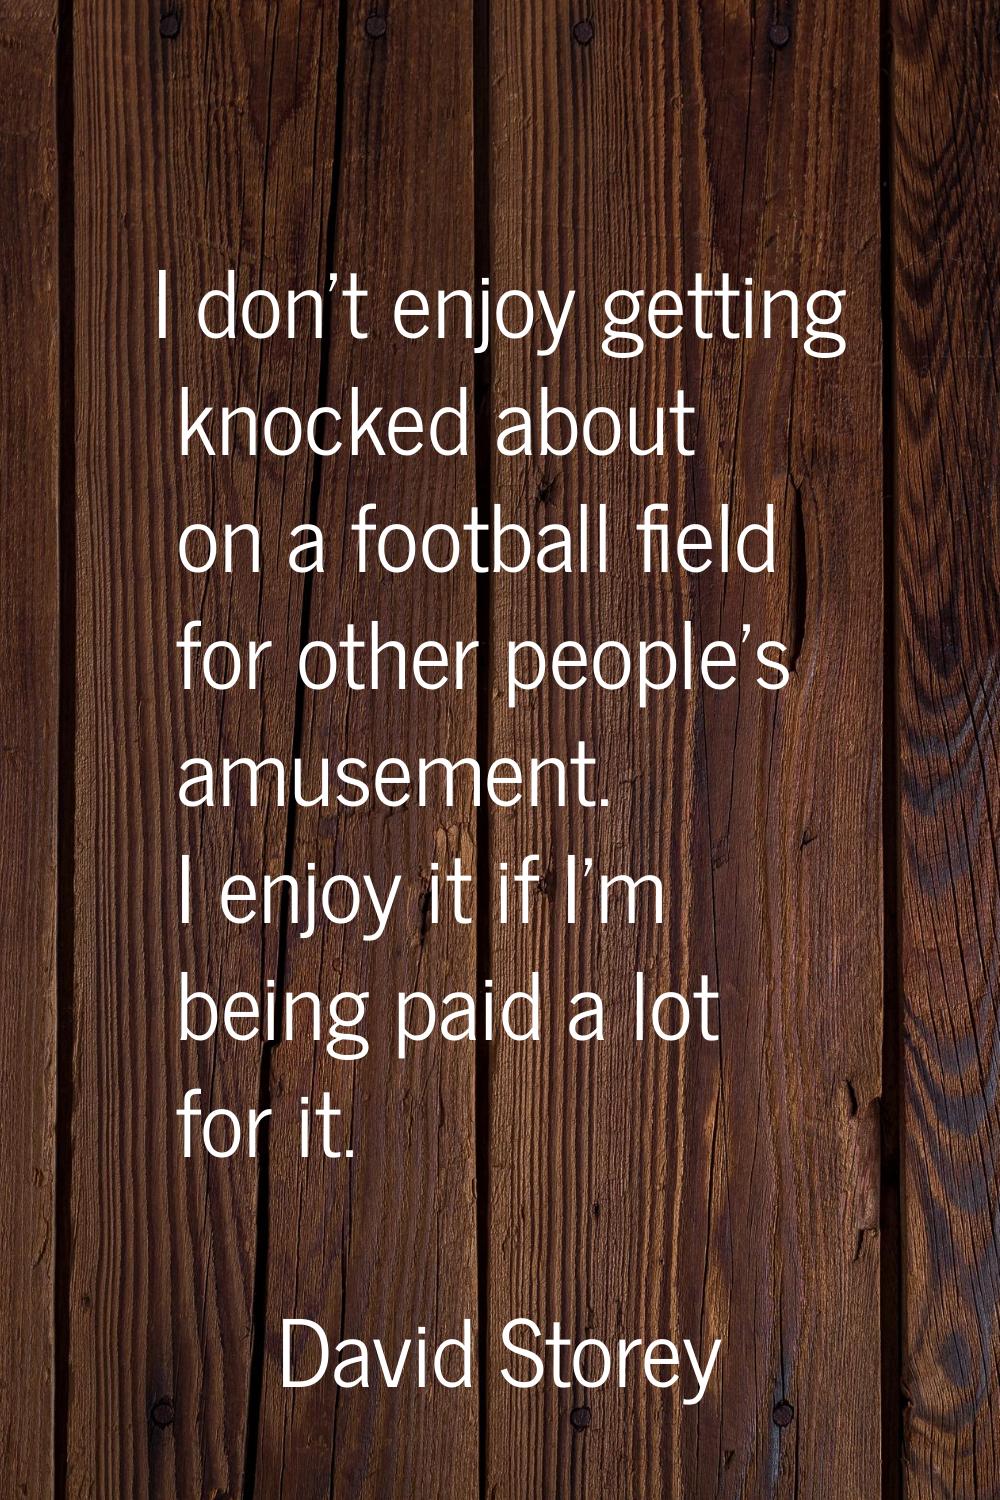 I don't enjoy getting knocked about on a football field for other people's amusement. I enjoy it if